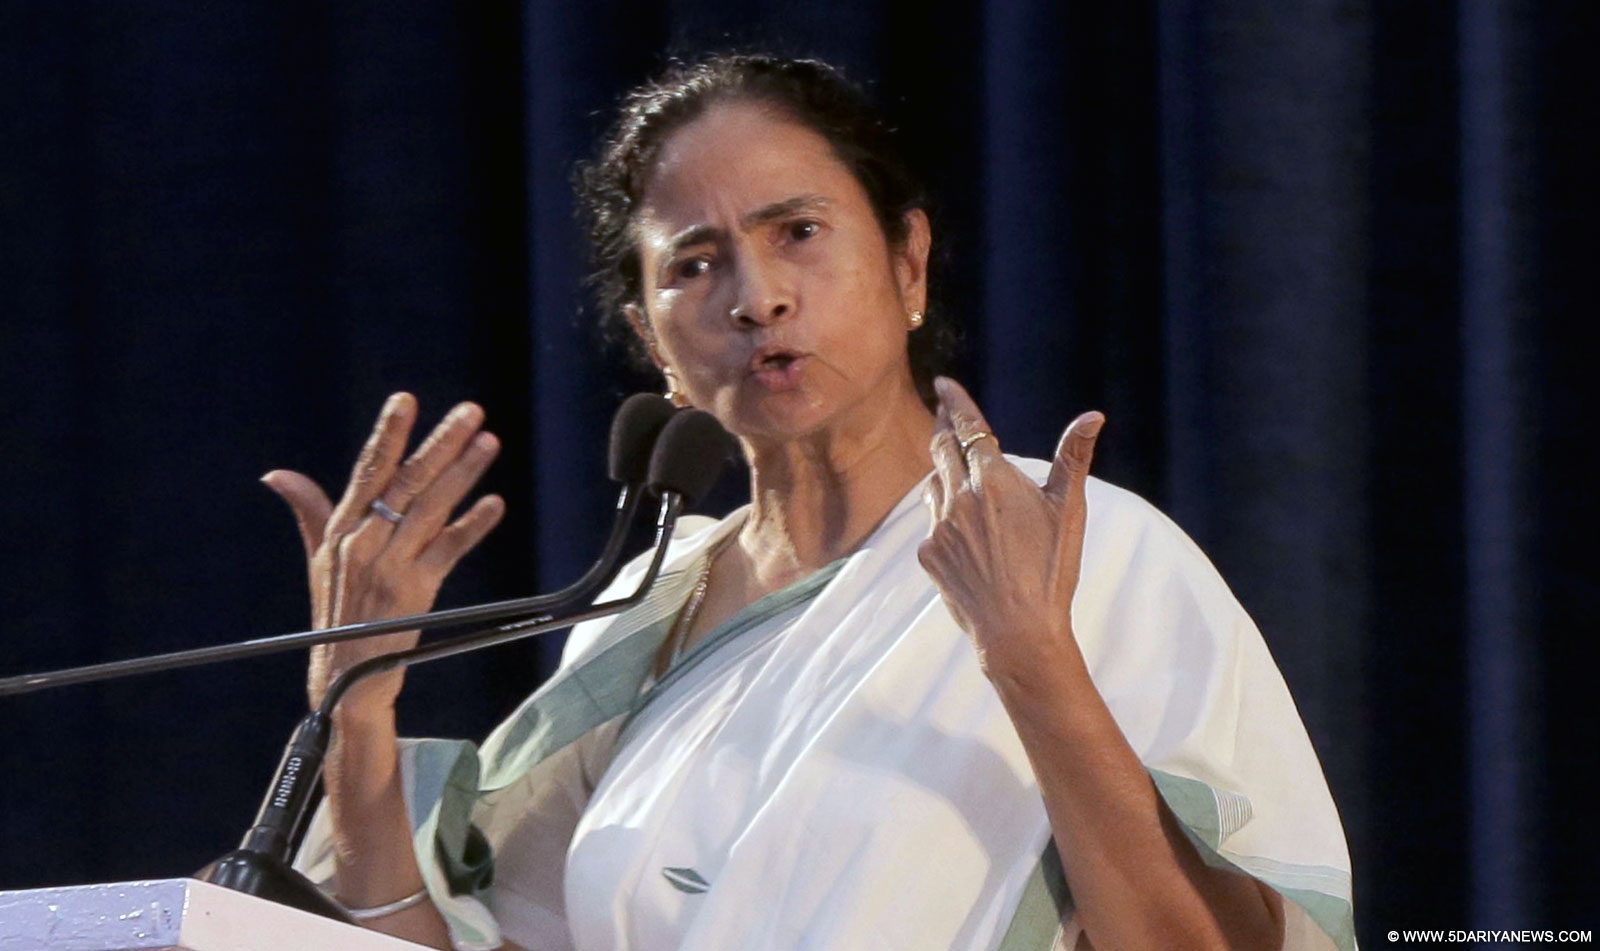 We are with nation, armed forces, but against Modi, BJP : Mamata Banerjee